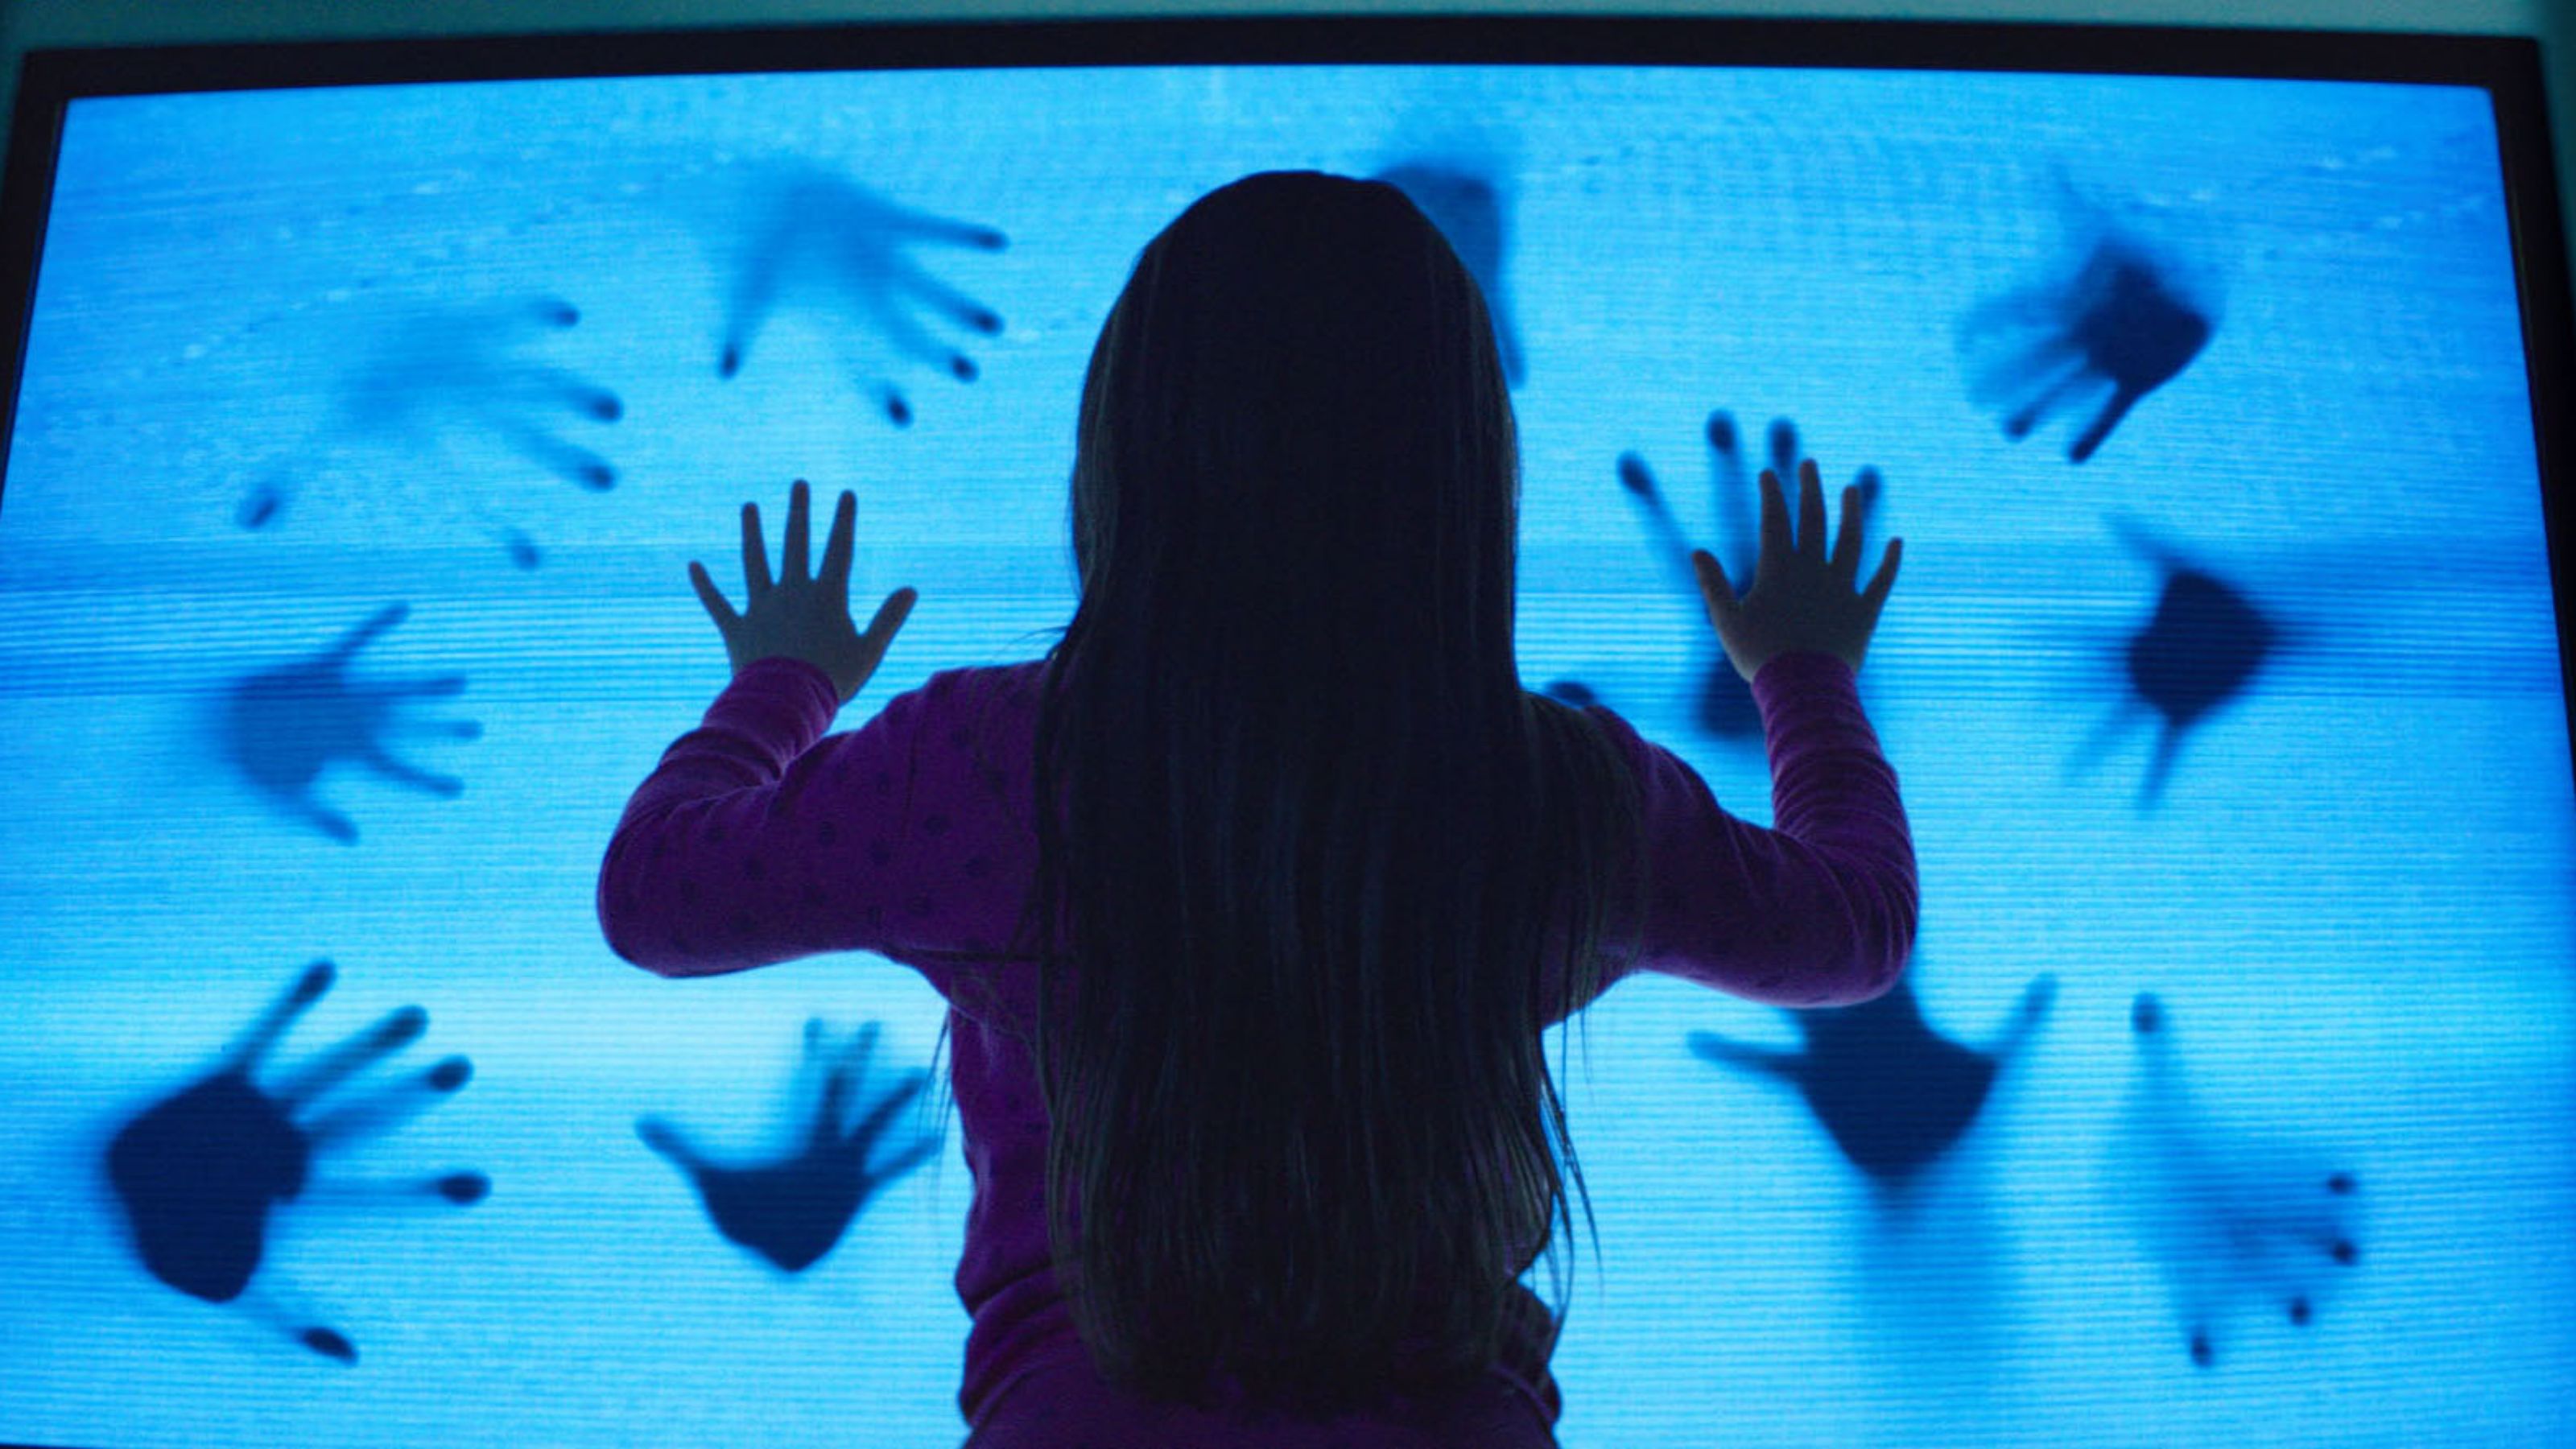 8 Poltergeist 2015 HD Wallpapers Backgrounds - Wallpaper Abyss